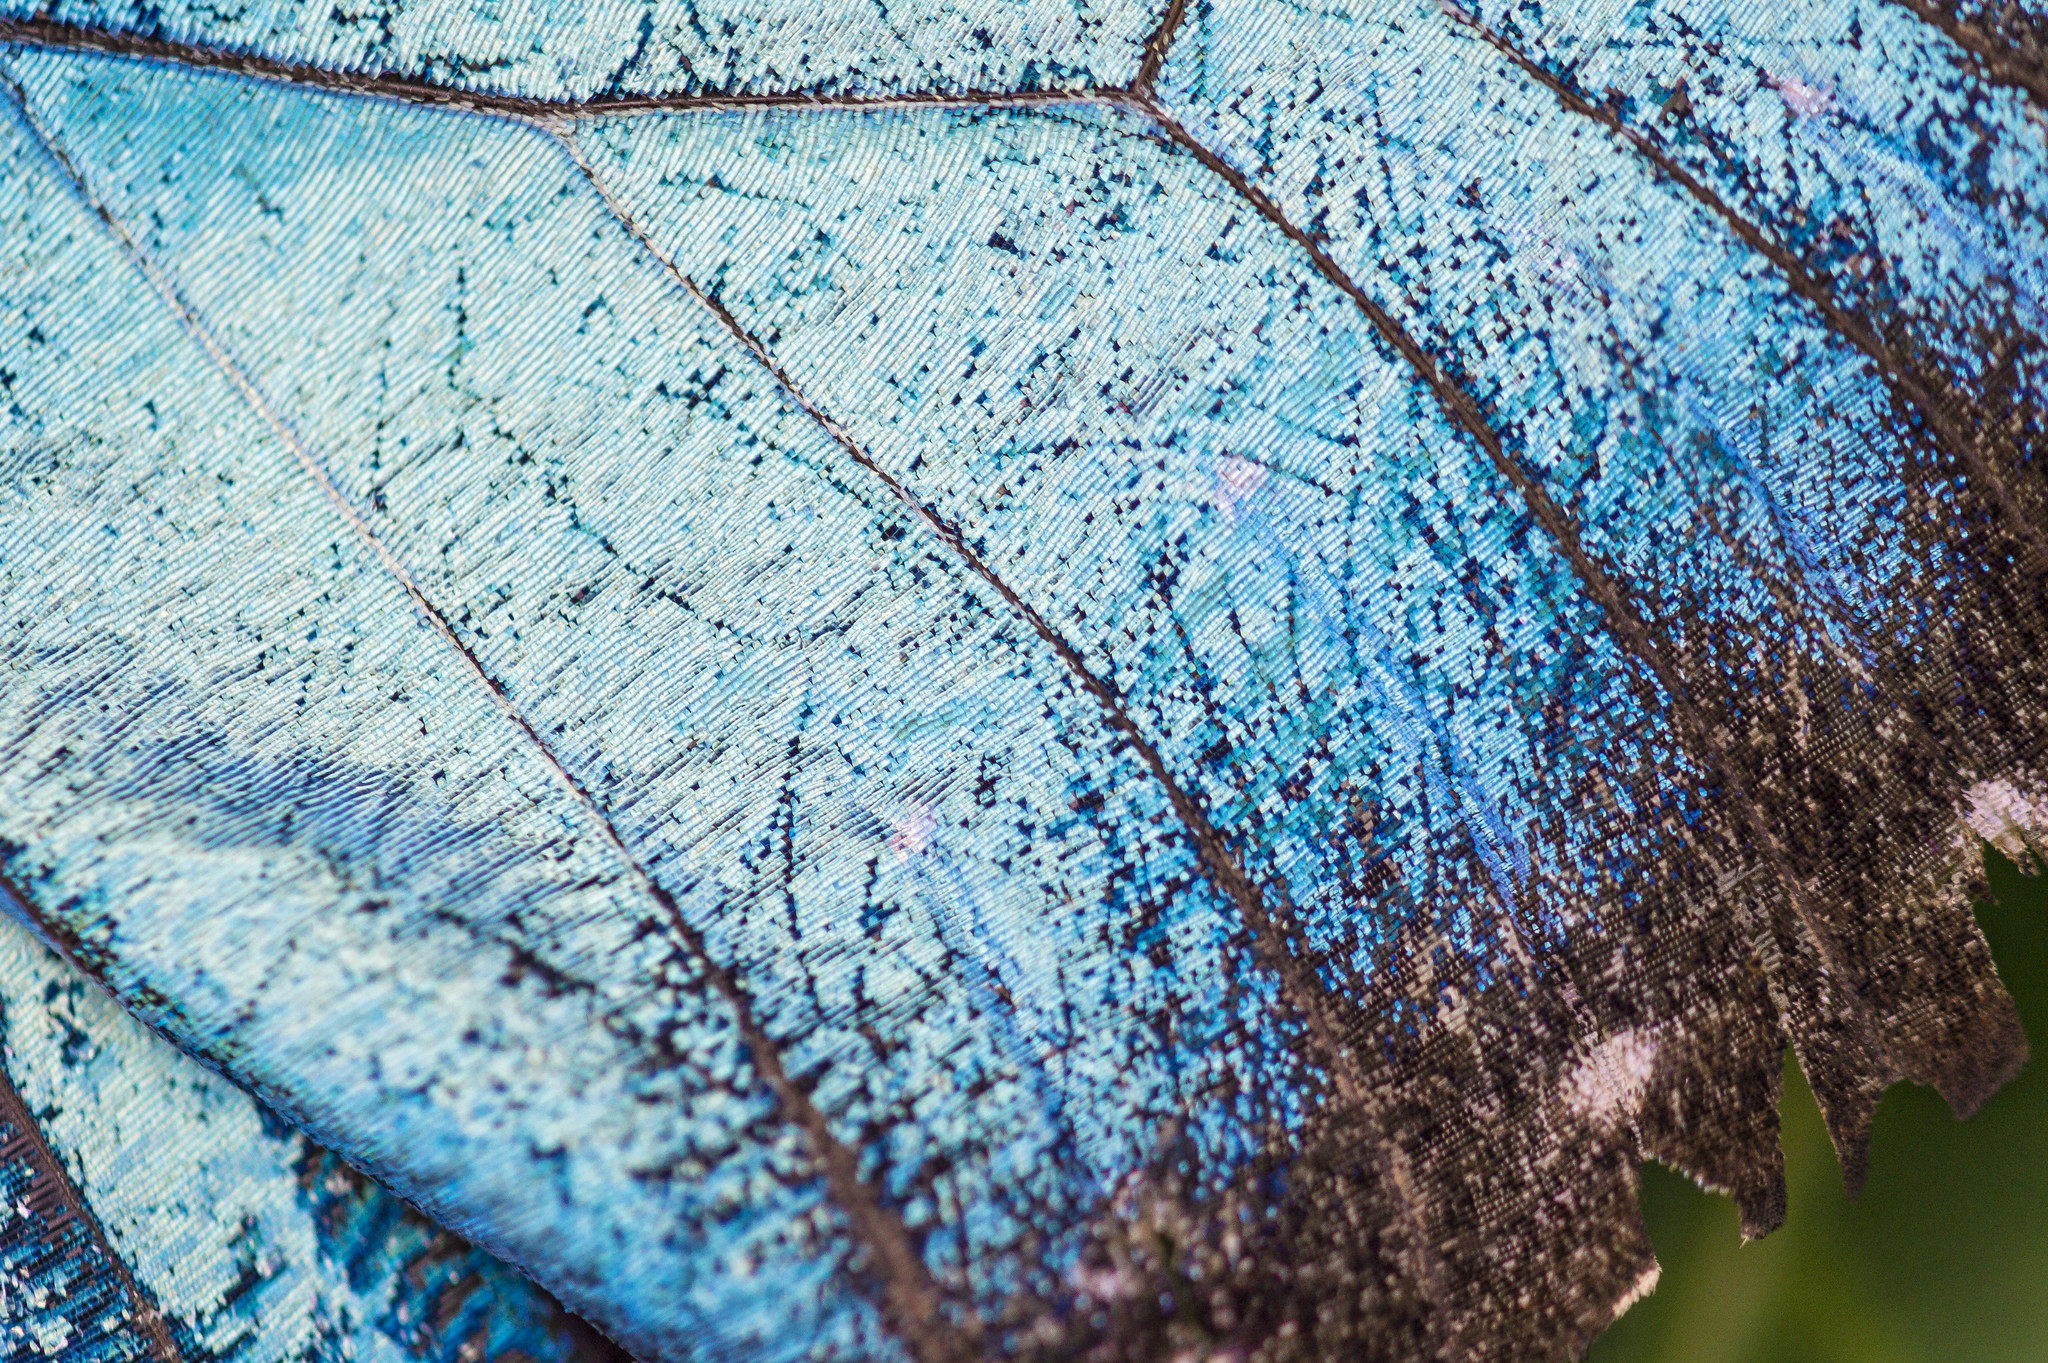 A close-up view of the veins and details of a blue morpho butterfly's wings